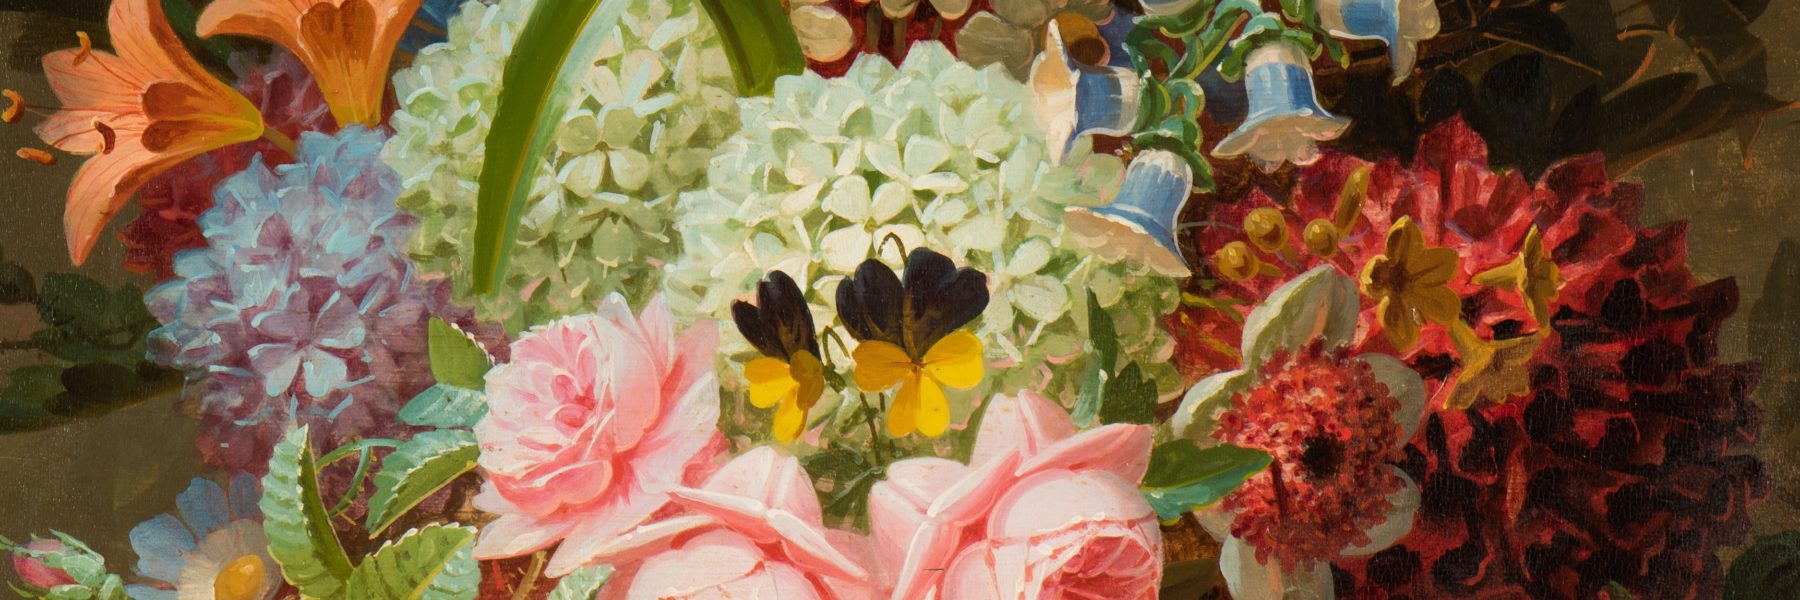 Bloom and Buzz Abound in Shelburne Museum’s Upcoming Exhibition, In the Garden